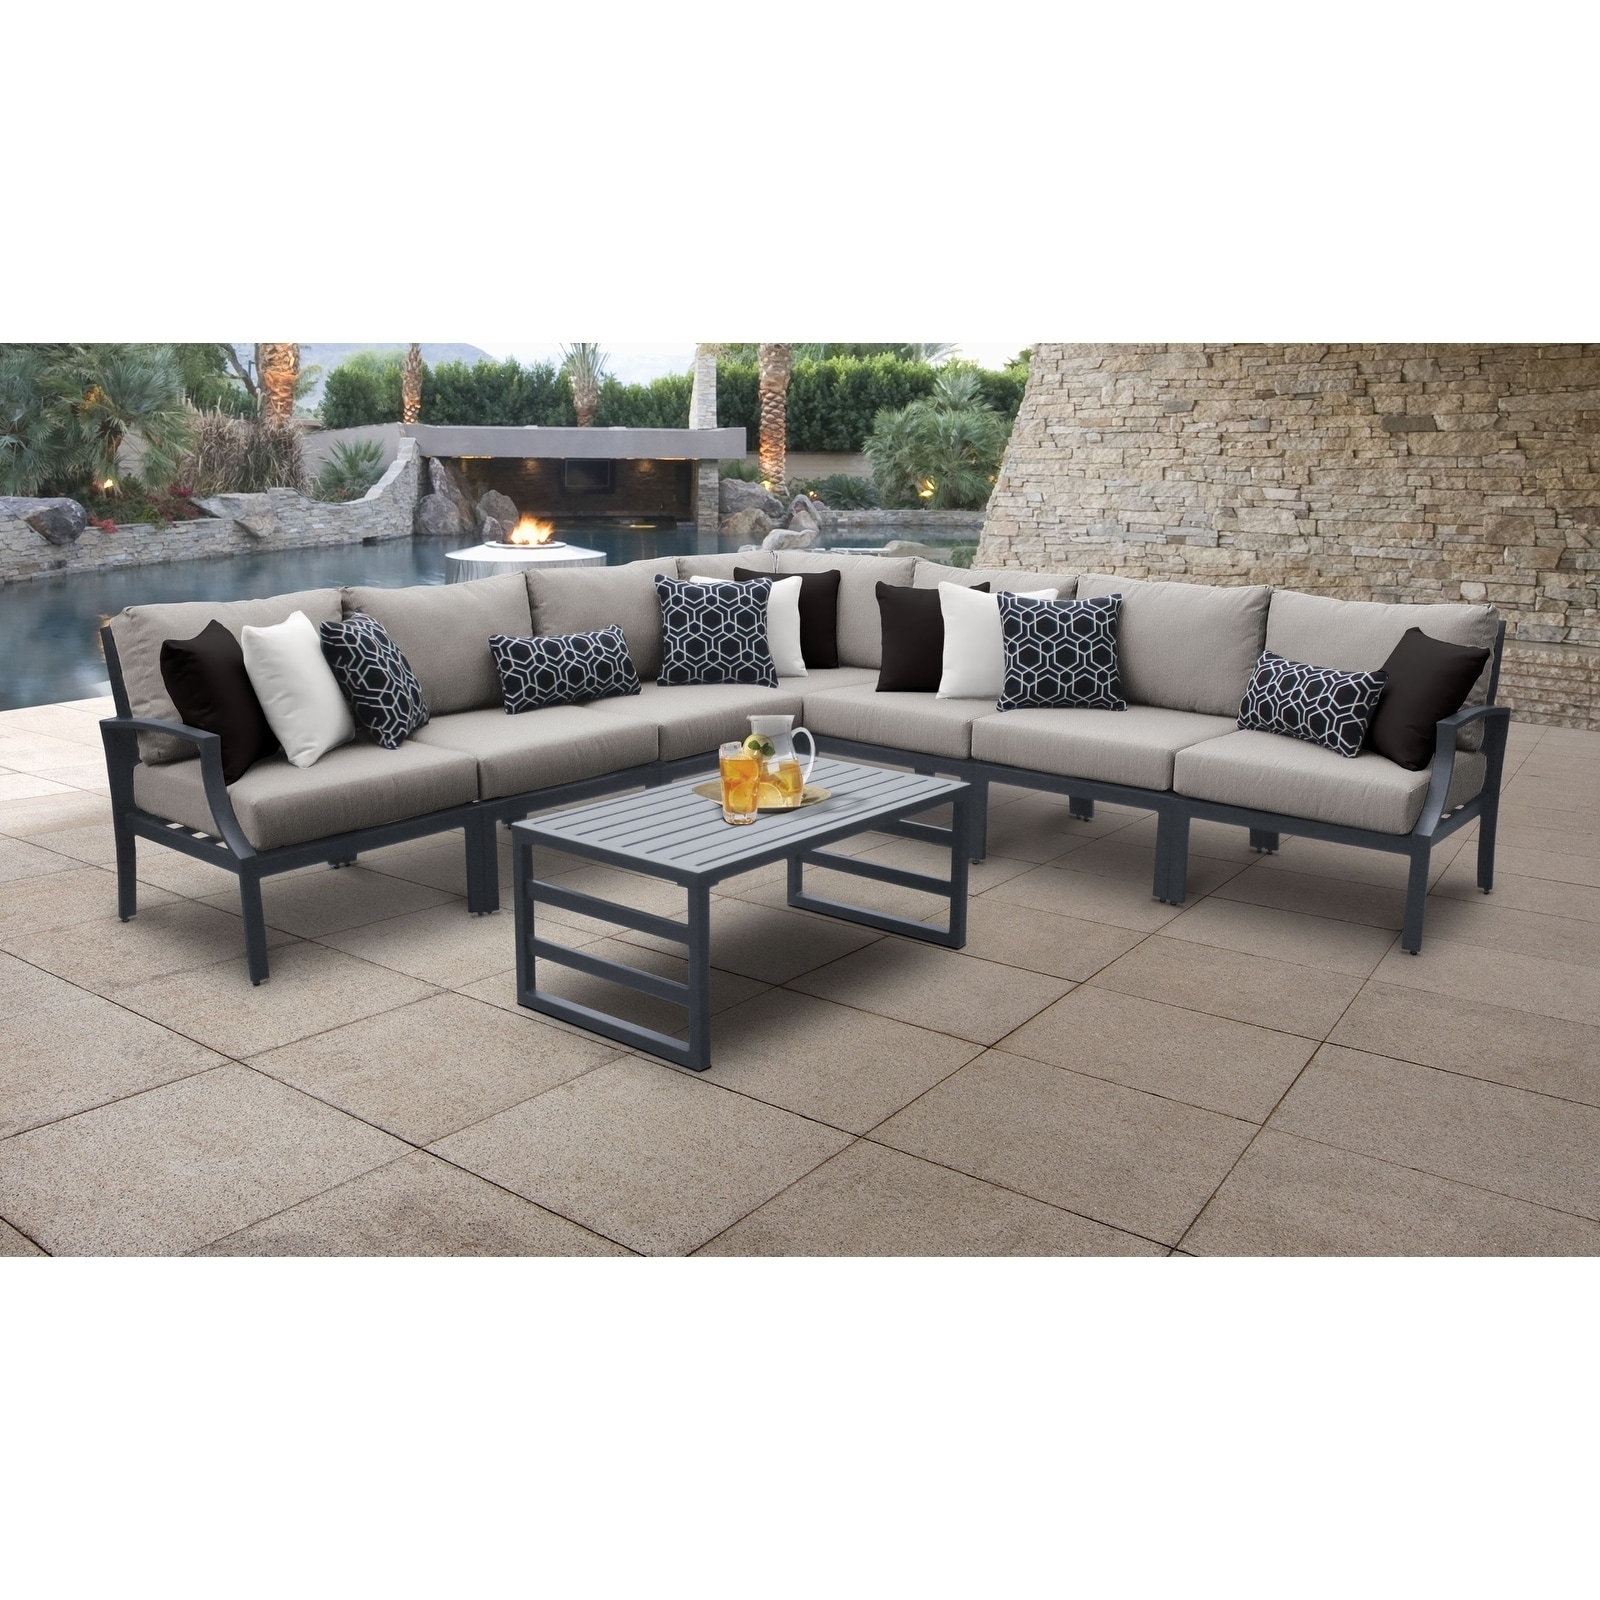 Moresby 8-piece Outdoor Aluminum Patio Furniture Set 08a By Havenside Home